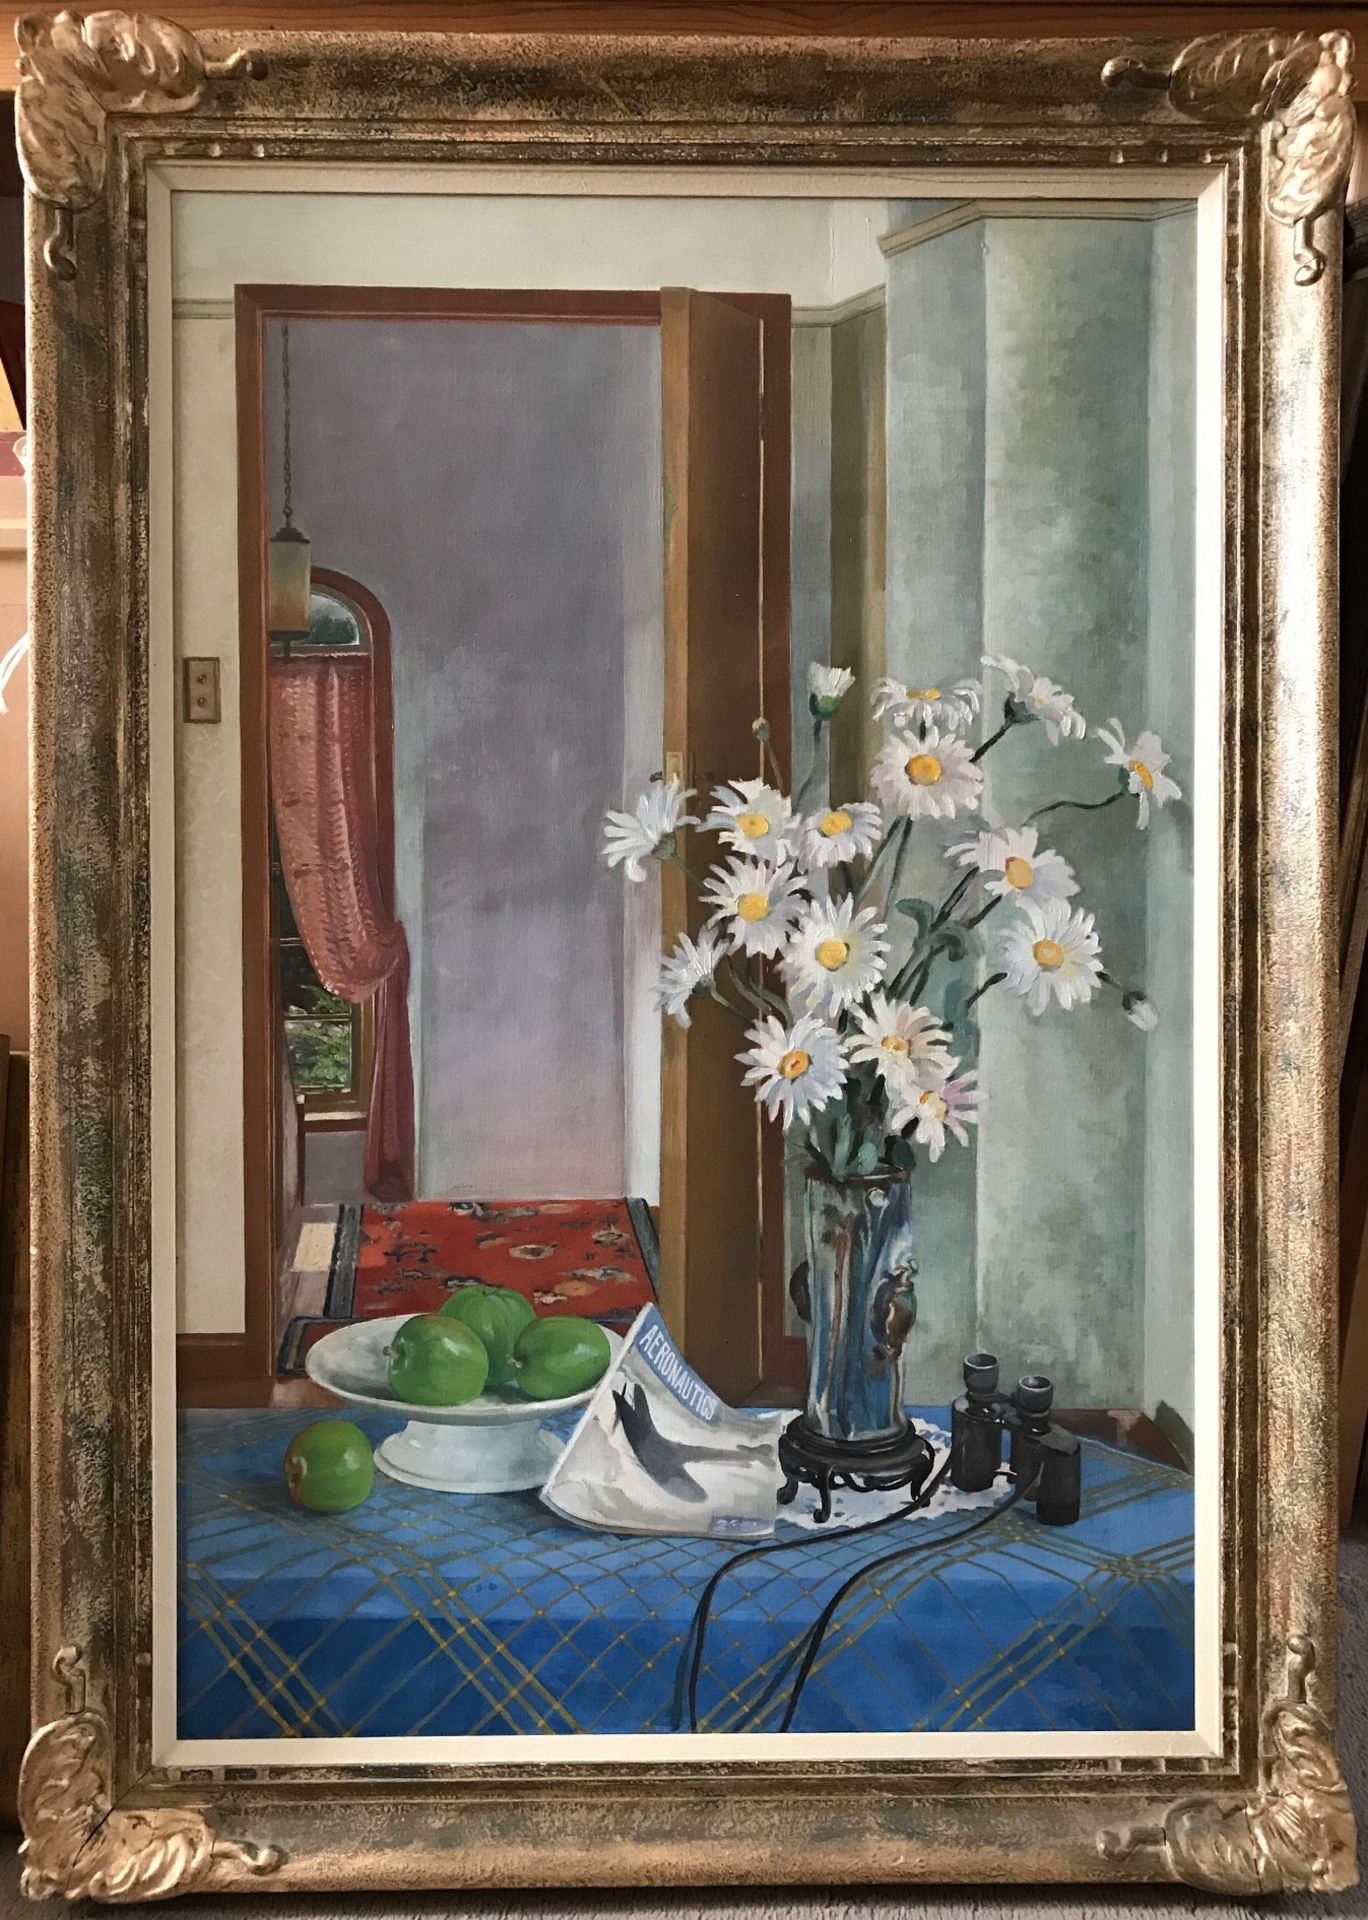 Original oil still life Flowers and Apples by Scottish artist Robert Wilkie,1888-1970 - Image 2 of 4